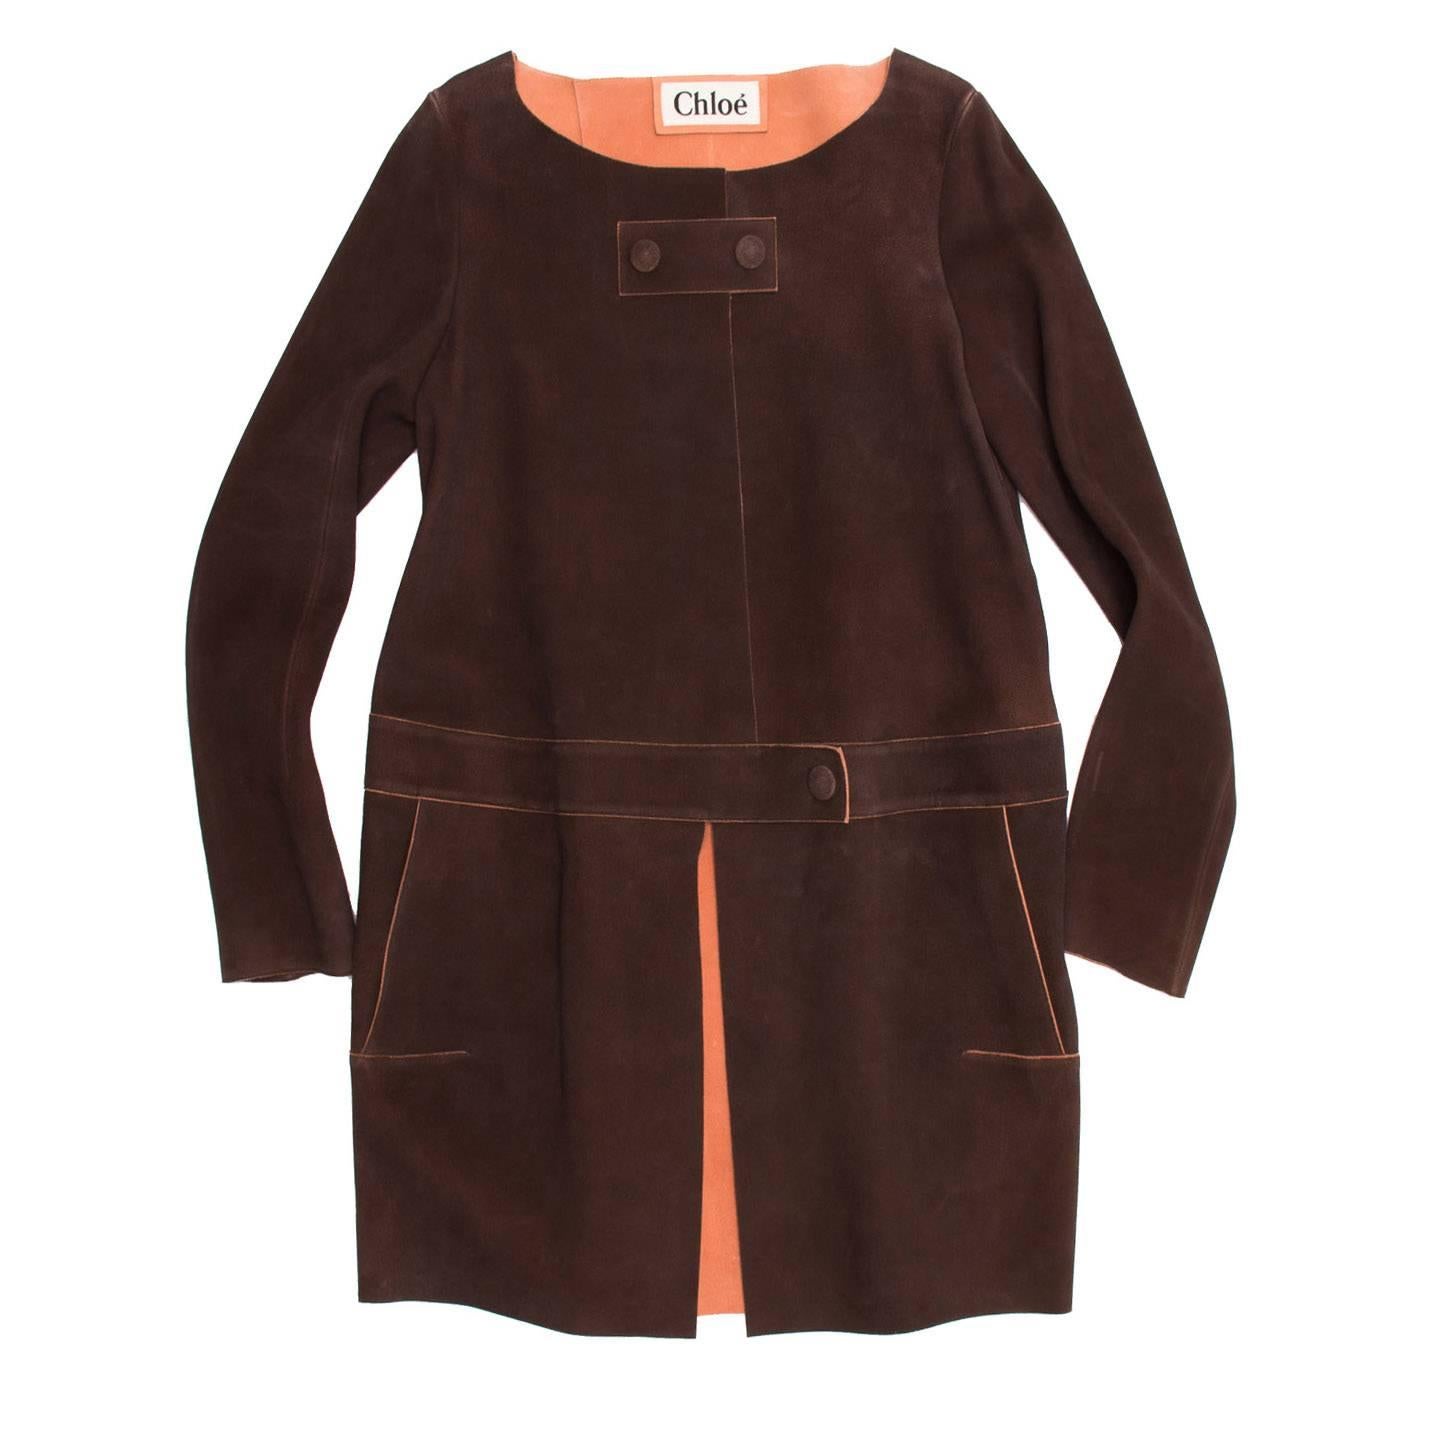 Chocolate brown deerskin suede coat with peach color inner face and seams profiles to create a beautiful contrast with the brown and enhance the 60's style flair. It's a knee length coat with a wide round collar and broad waistband at lower waist